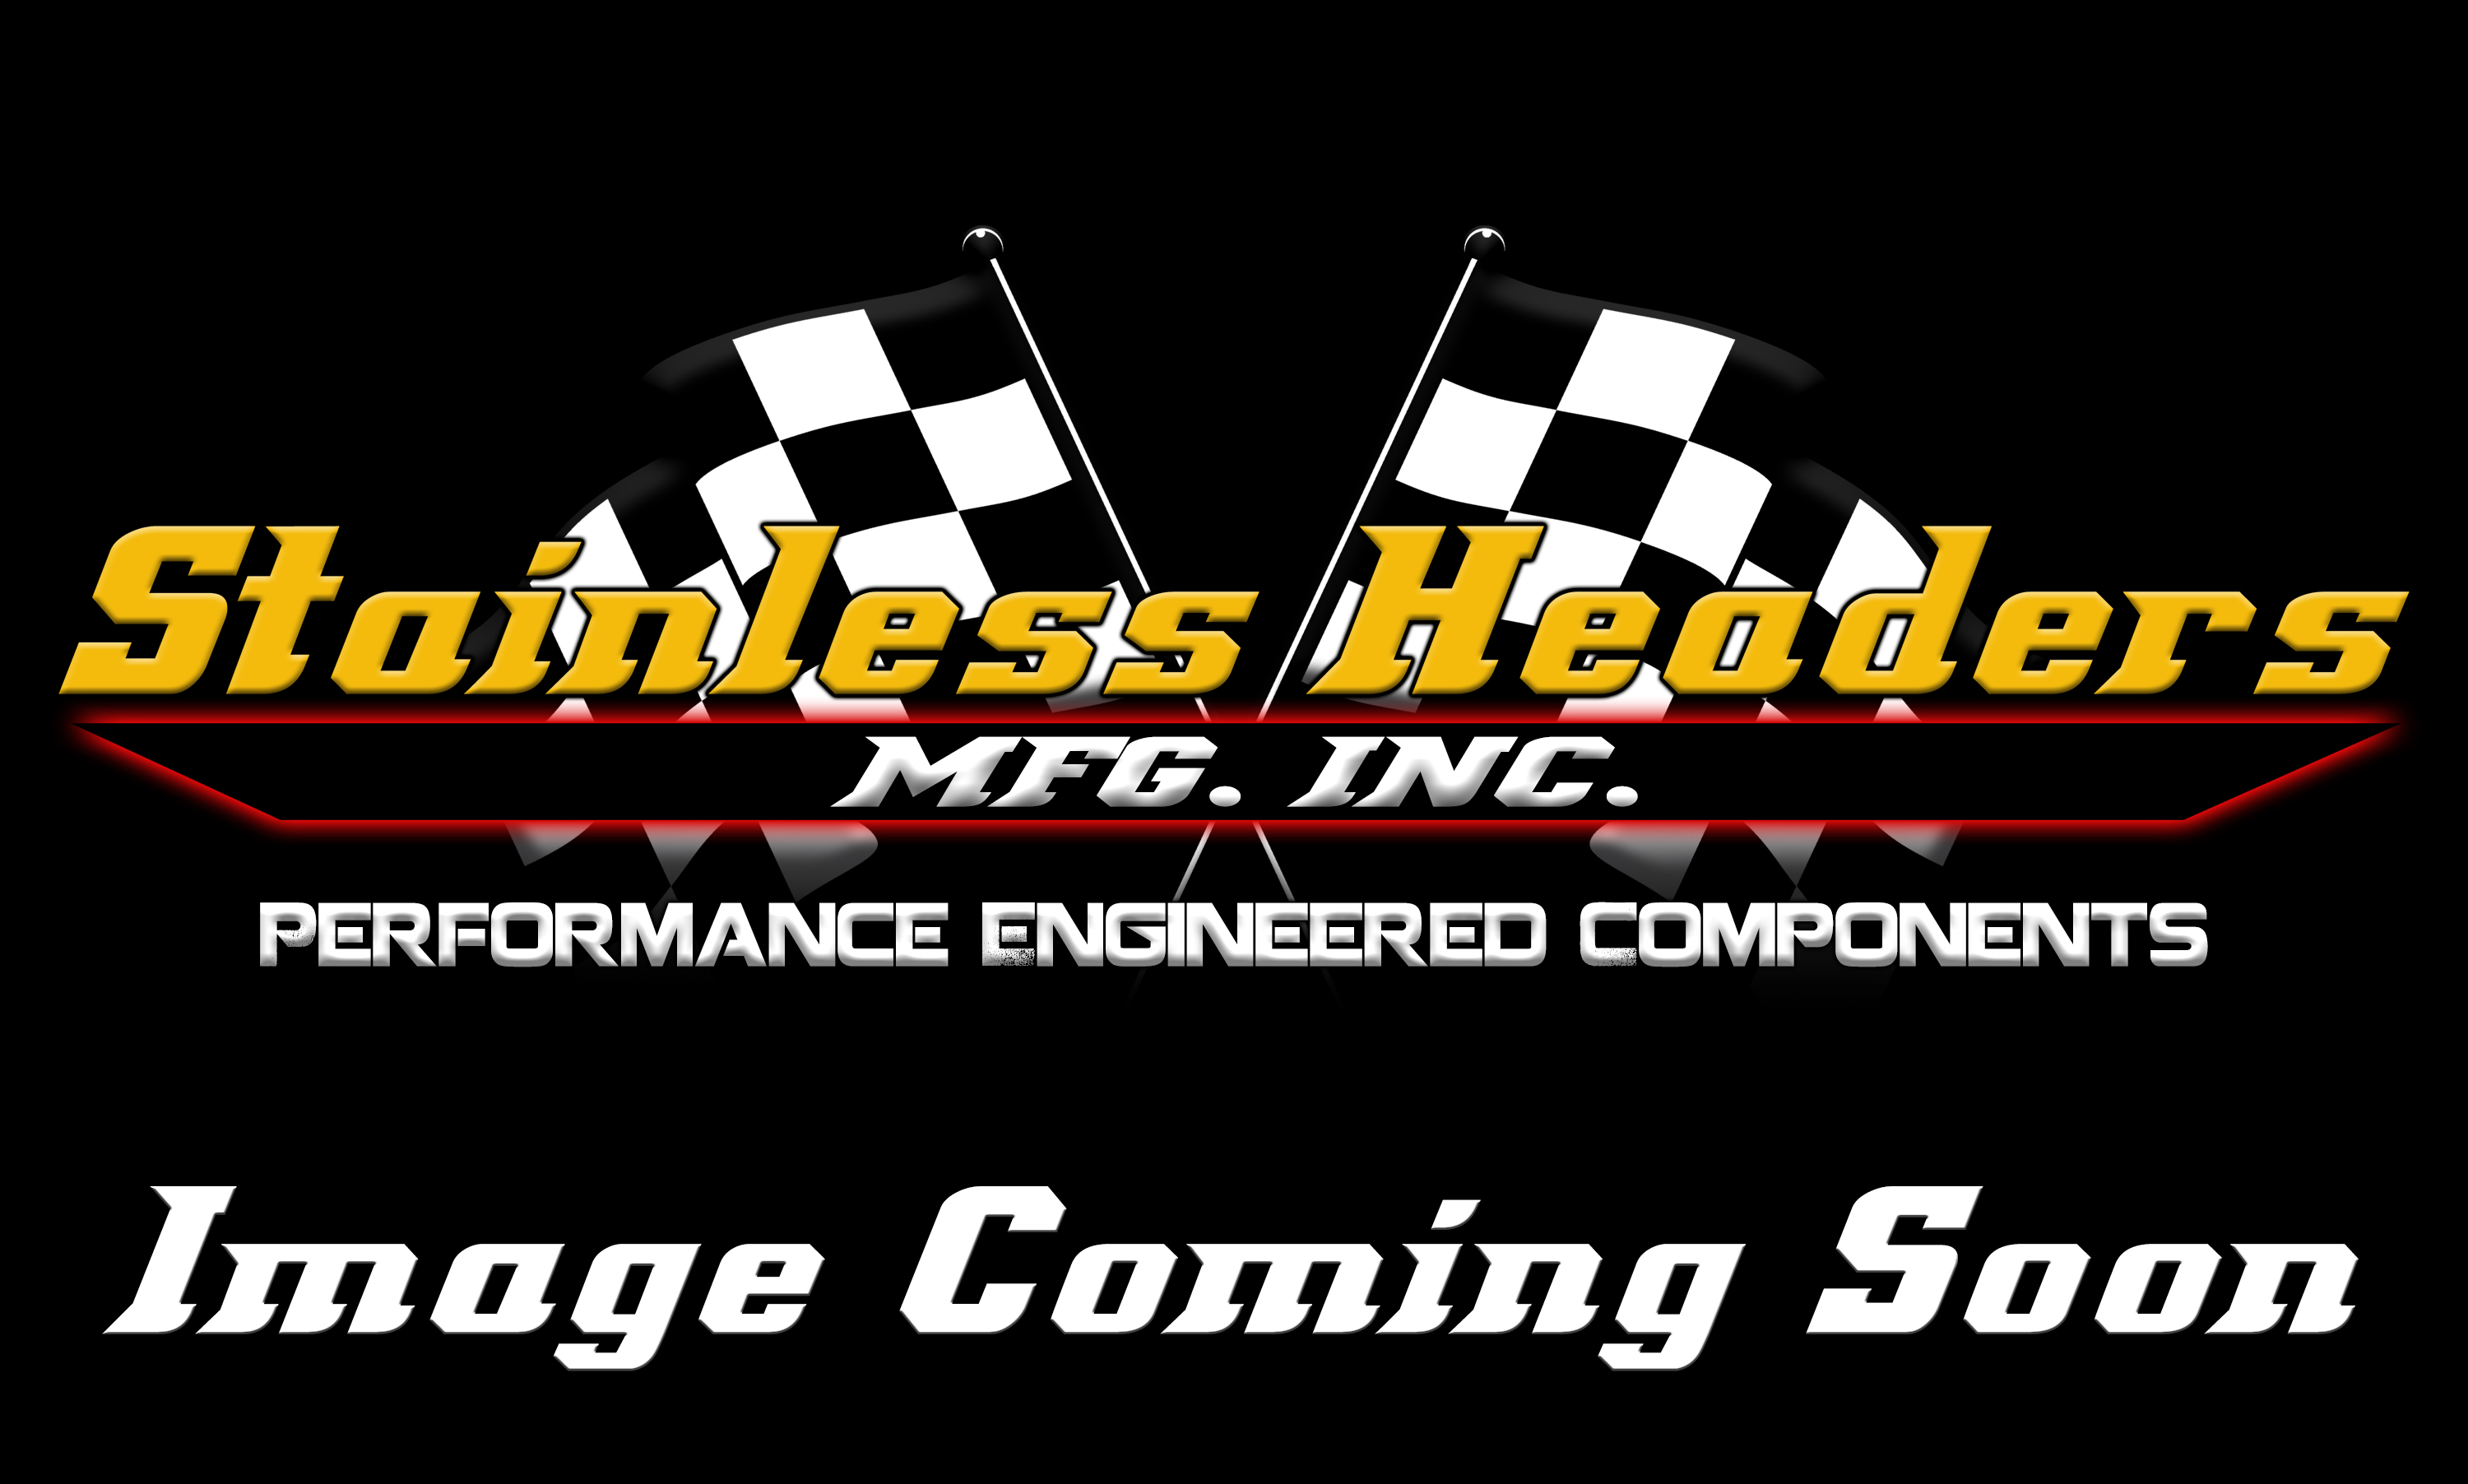 Stainless Headers - 2 5/8" Primary 4 into 1 Performance Merge Collector-16ga 304ss